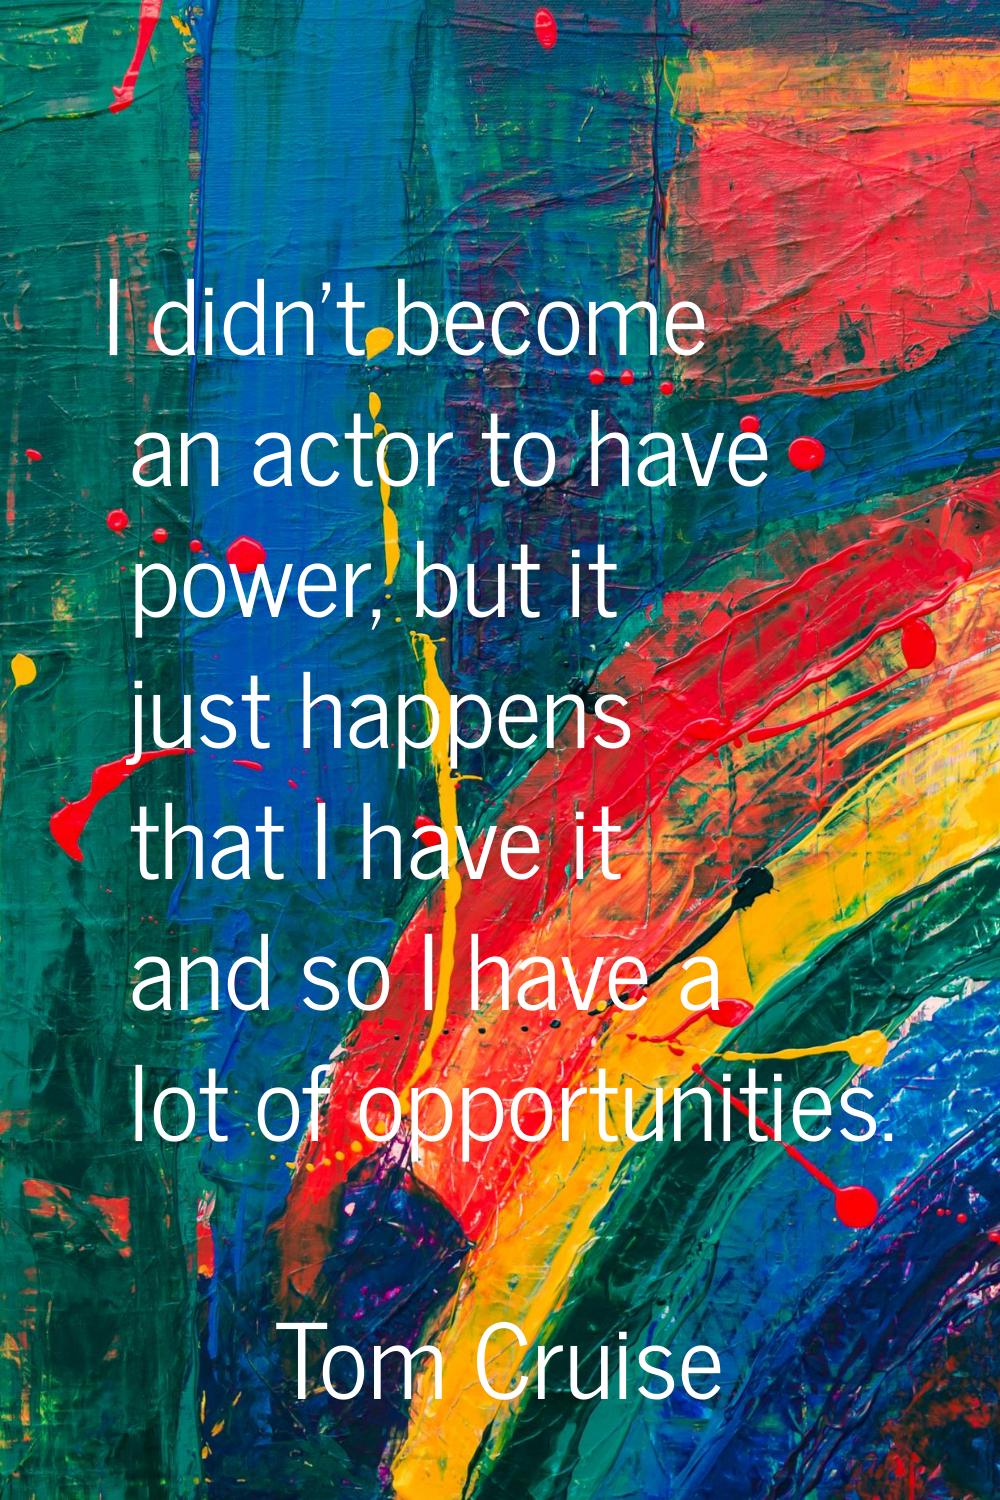 I didn't become an actor to have power, but it just happens that I have it and so I have a lot of o